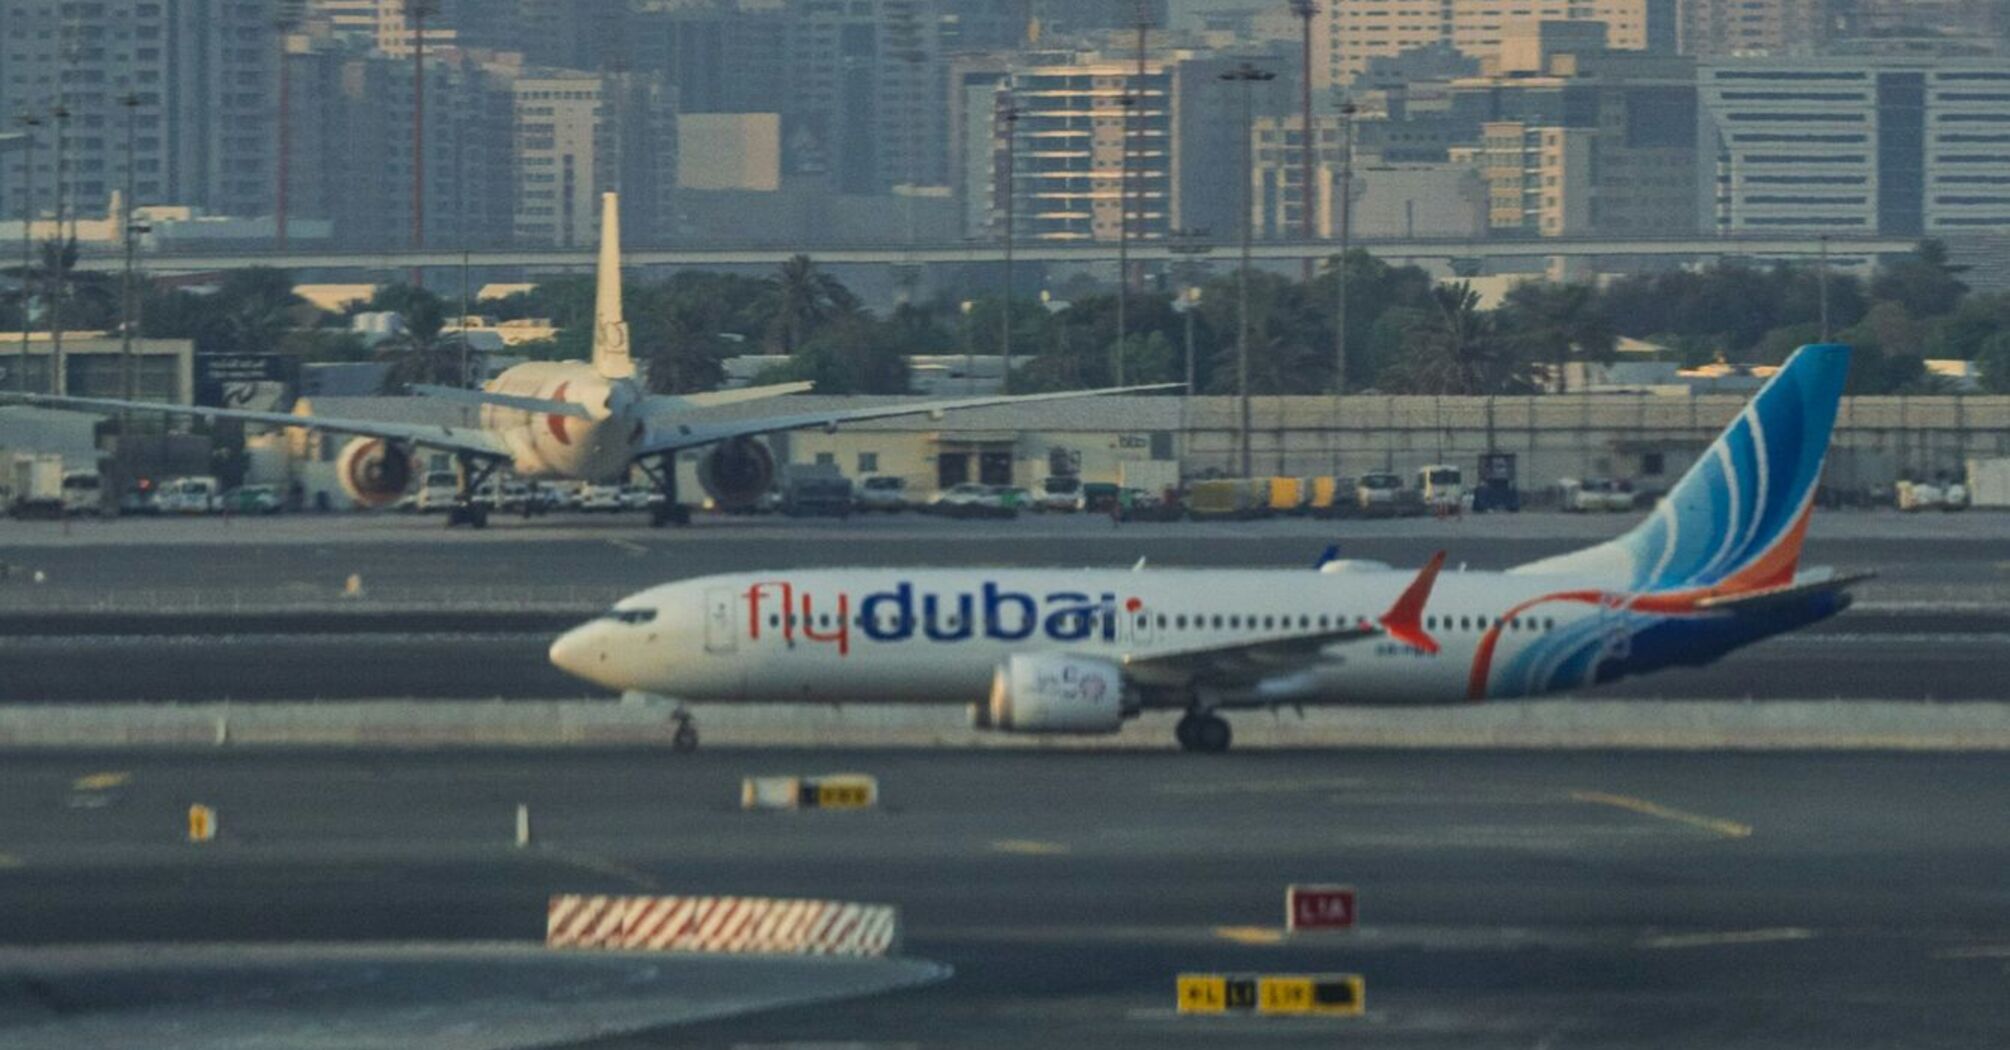 flydubai airplane at Dubai International Airport with city skyline in the background